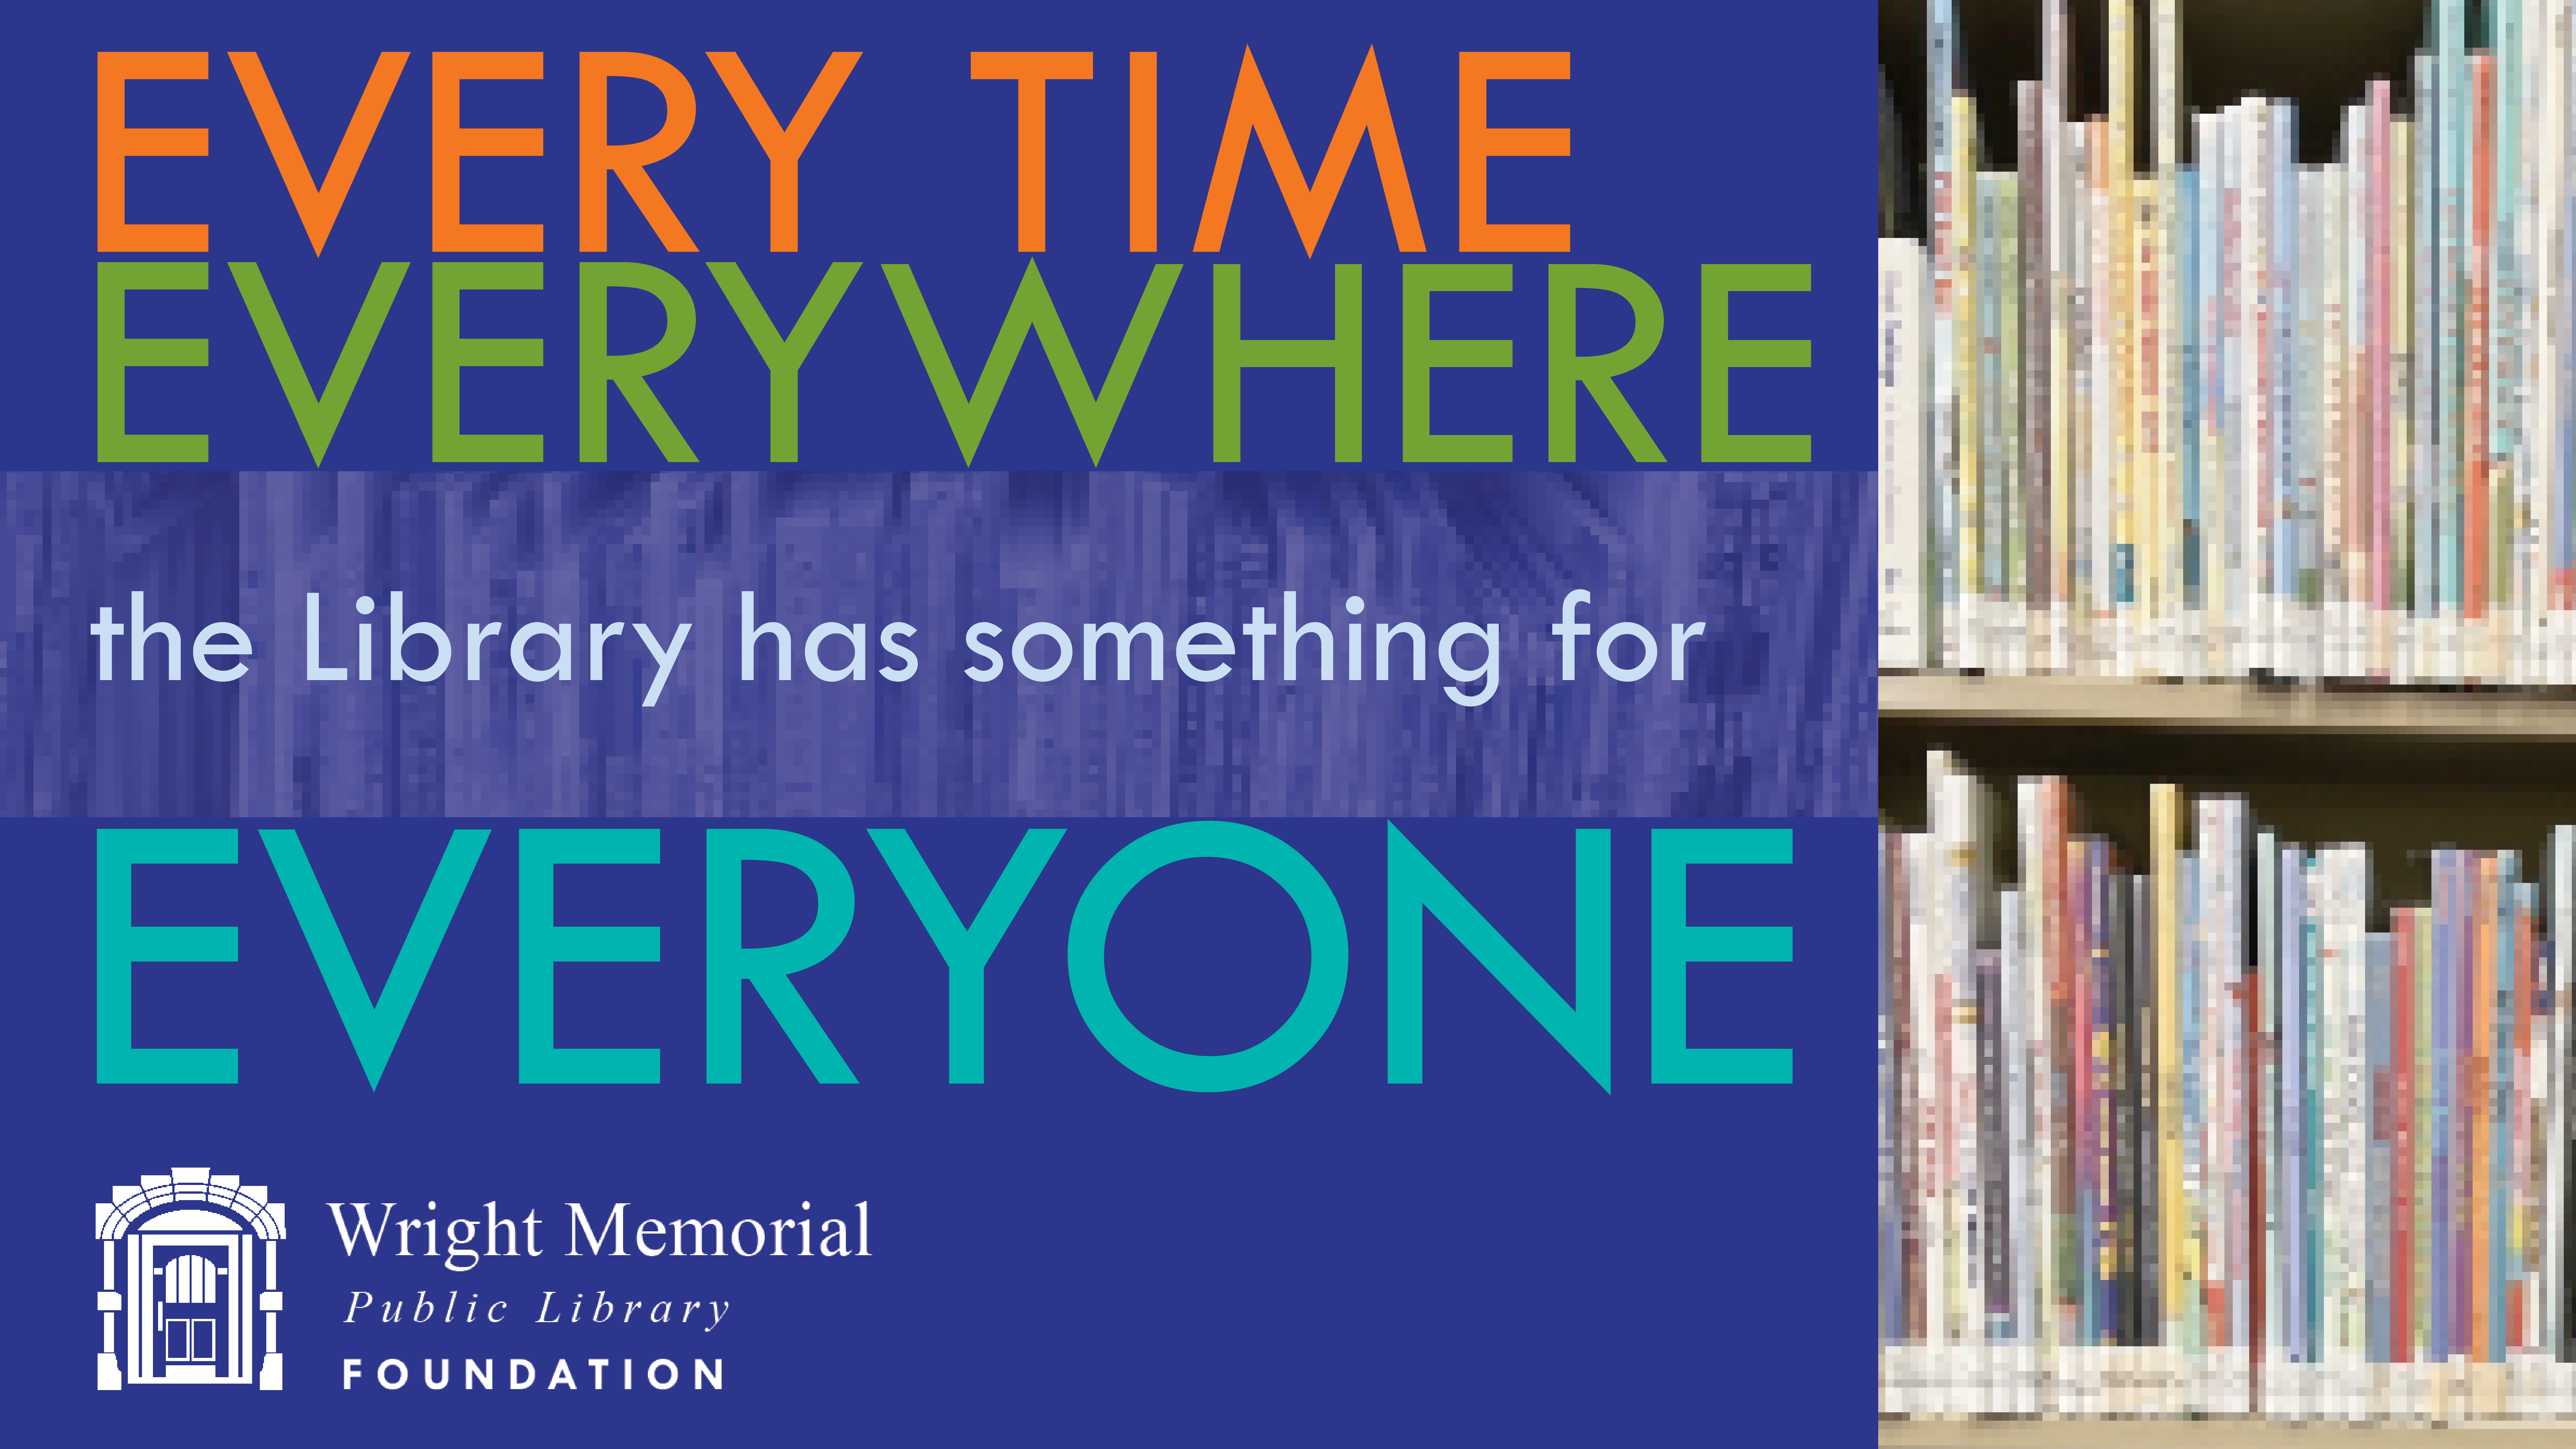 Annual Campaign slogan for 2023: Every time, everywhere, the library has something for everyone. Wright Memorial Public Library Foundation.